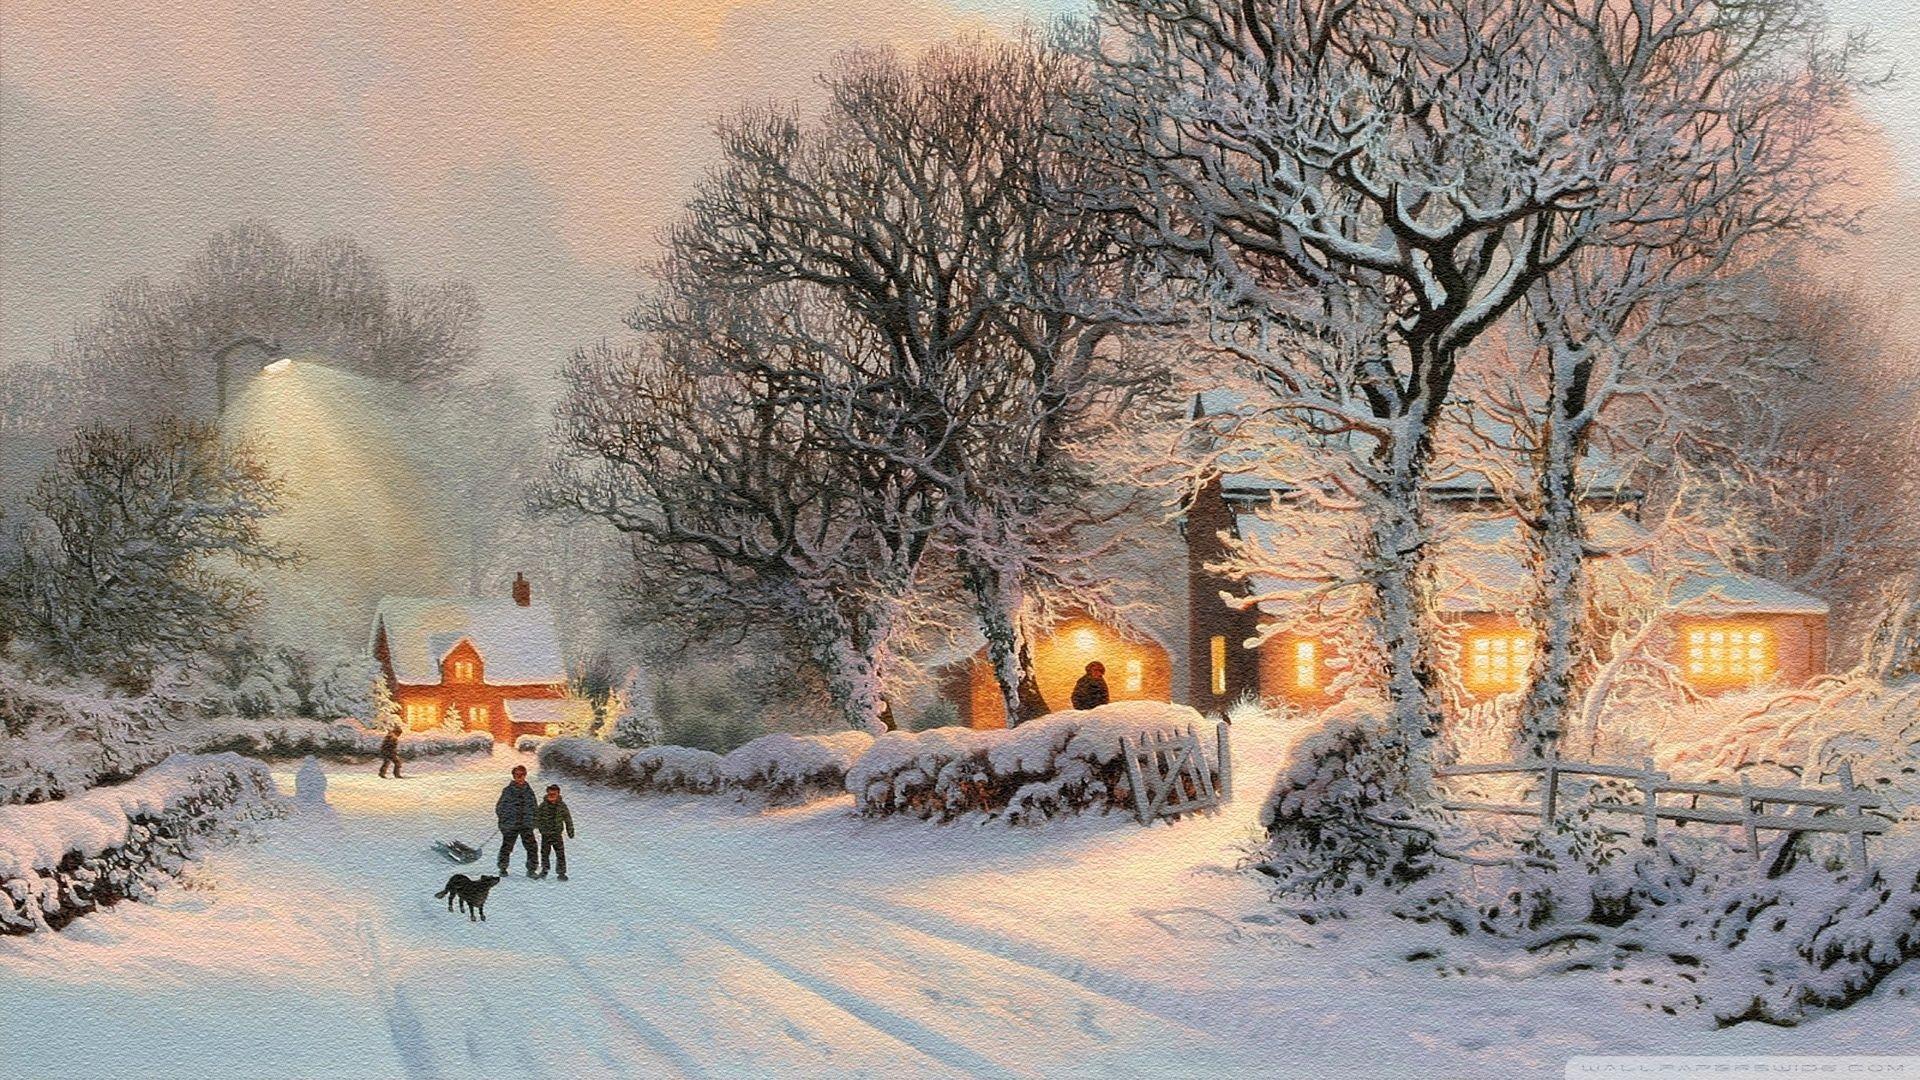 Winter Village Wallpapers - Top Free Winter Village Backgrounds ...